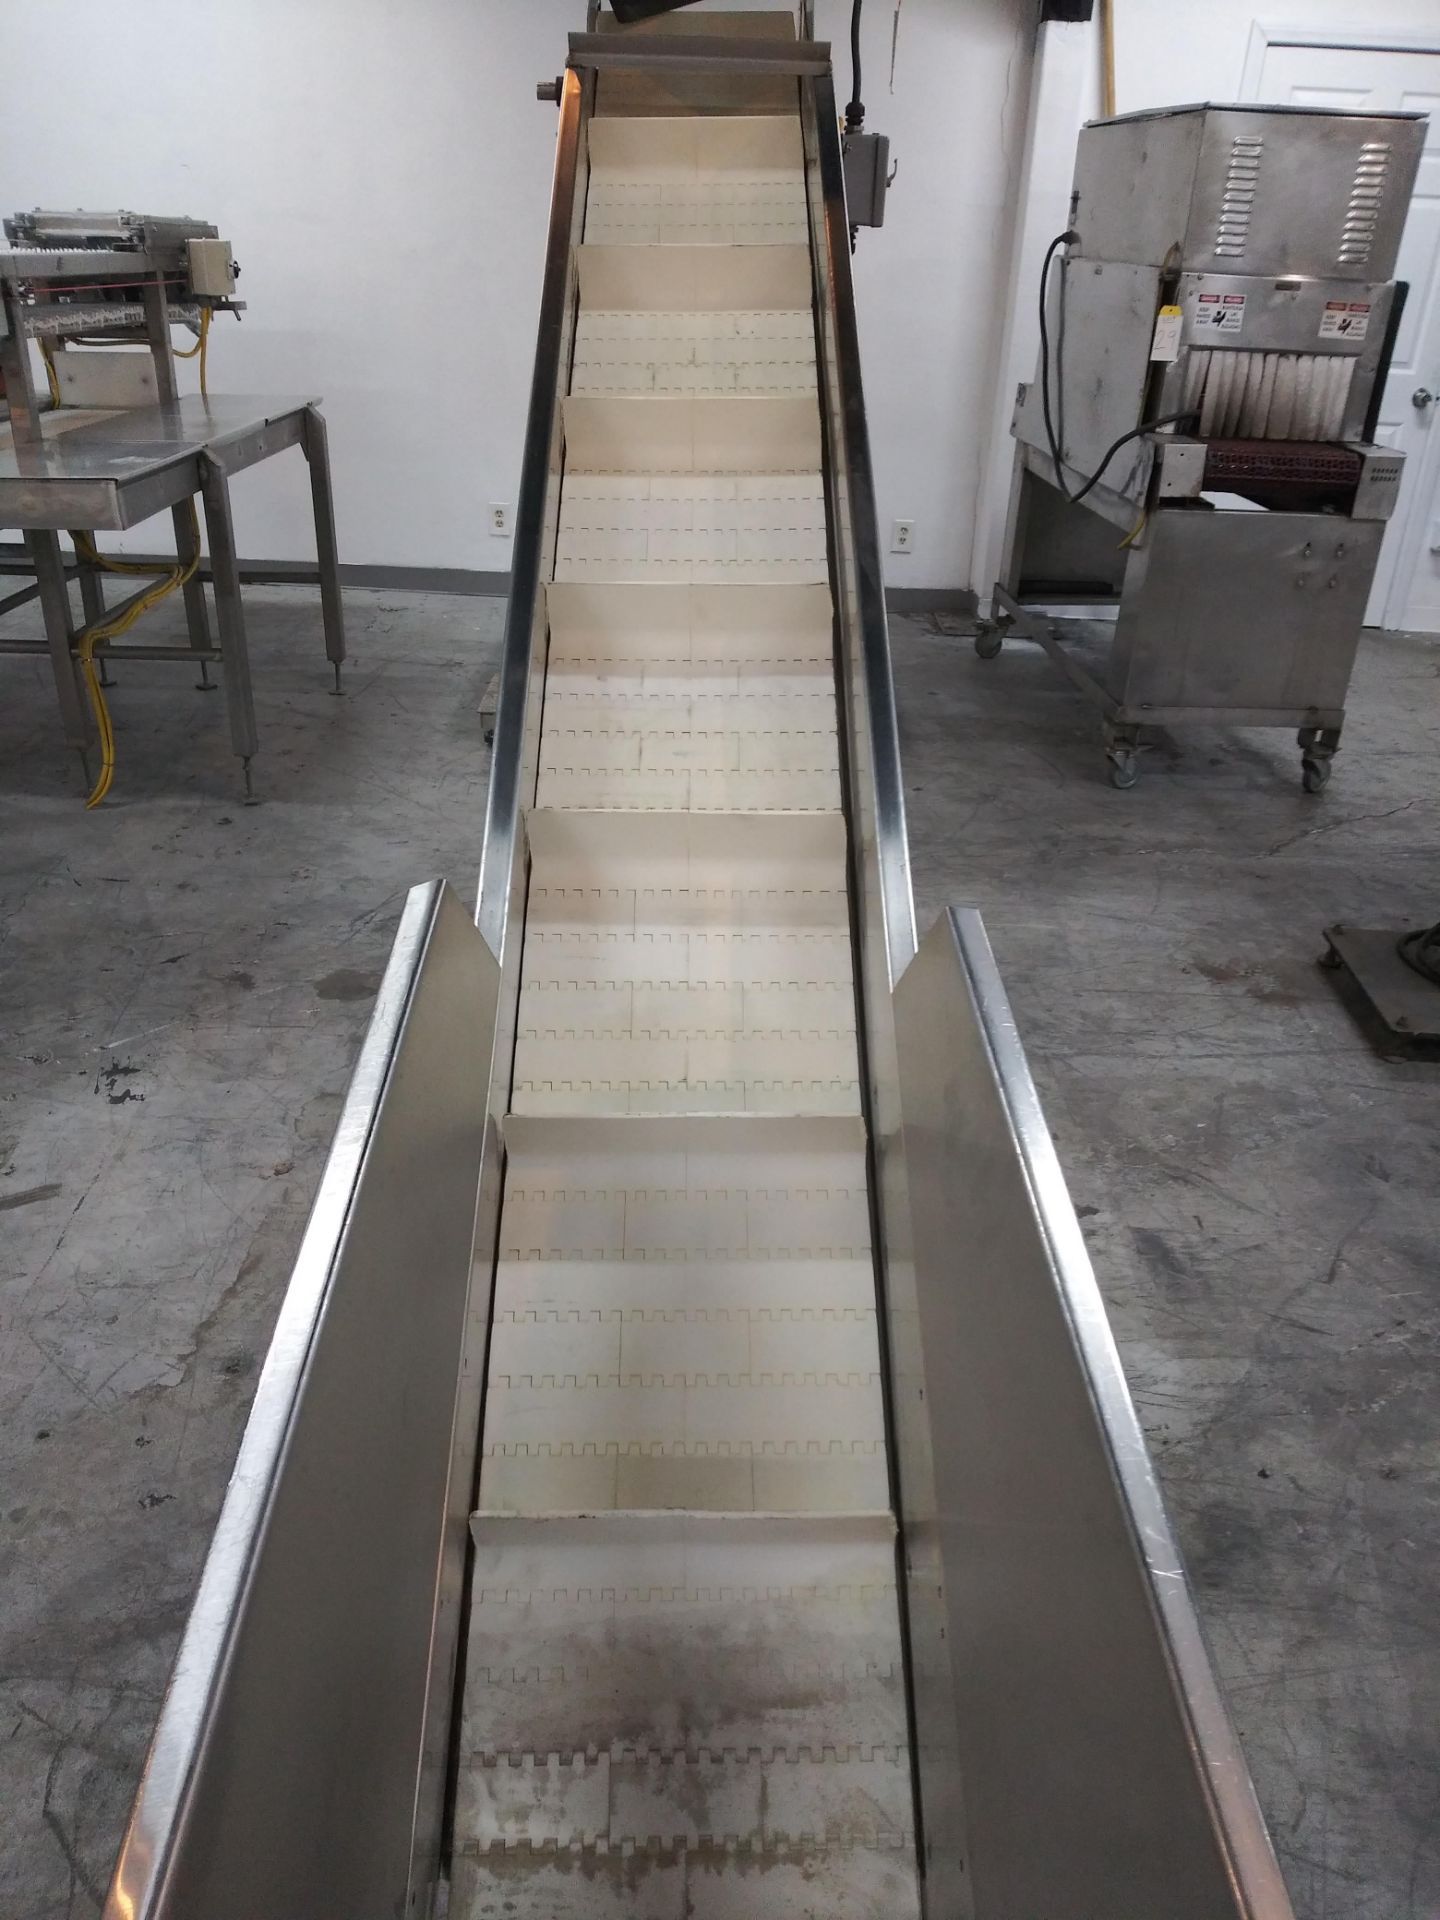 108" X 12" Stainless Steel Inclined Belt Conveyor - Image 2 of 3